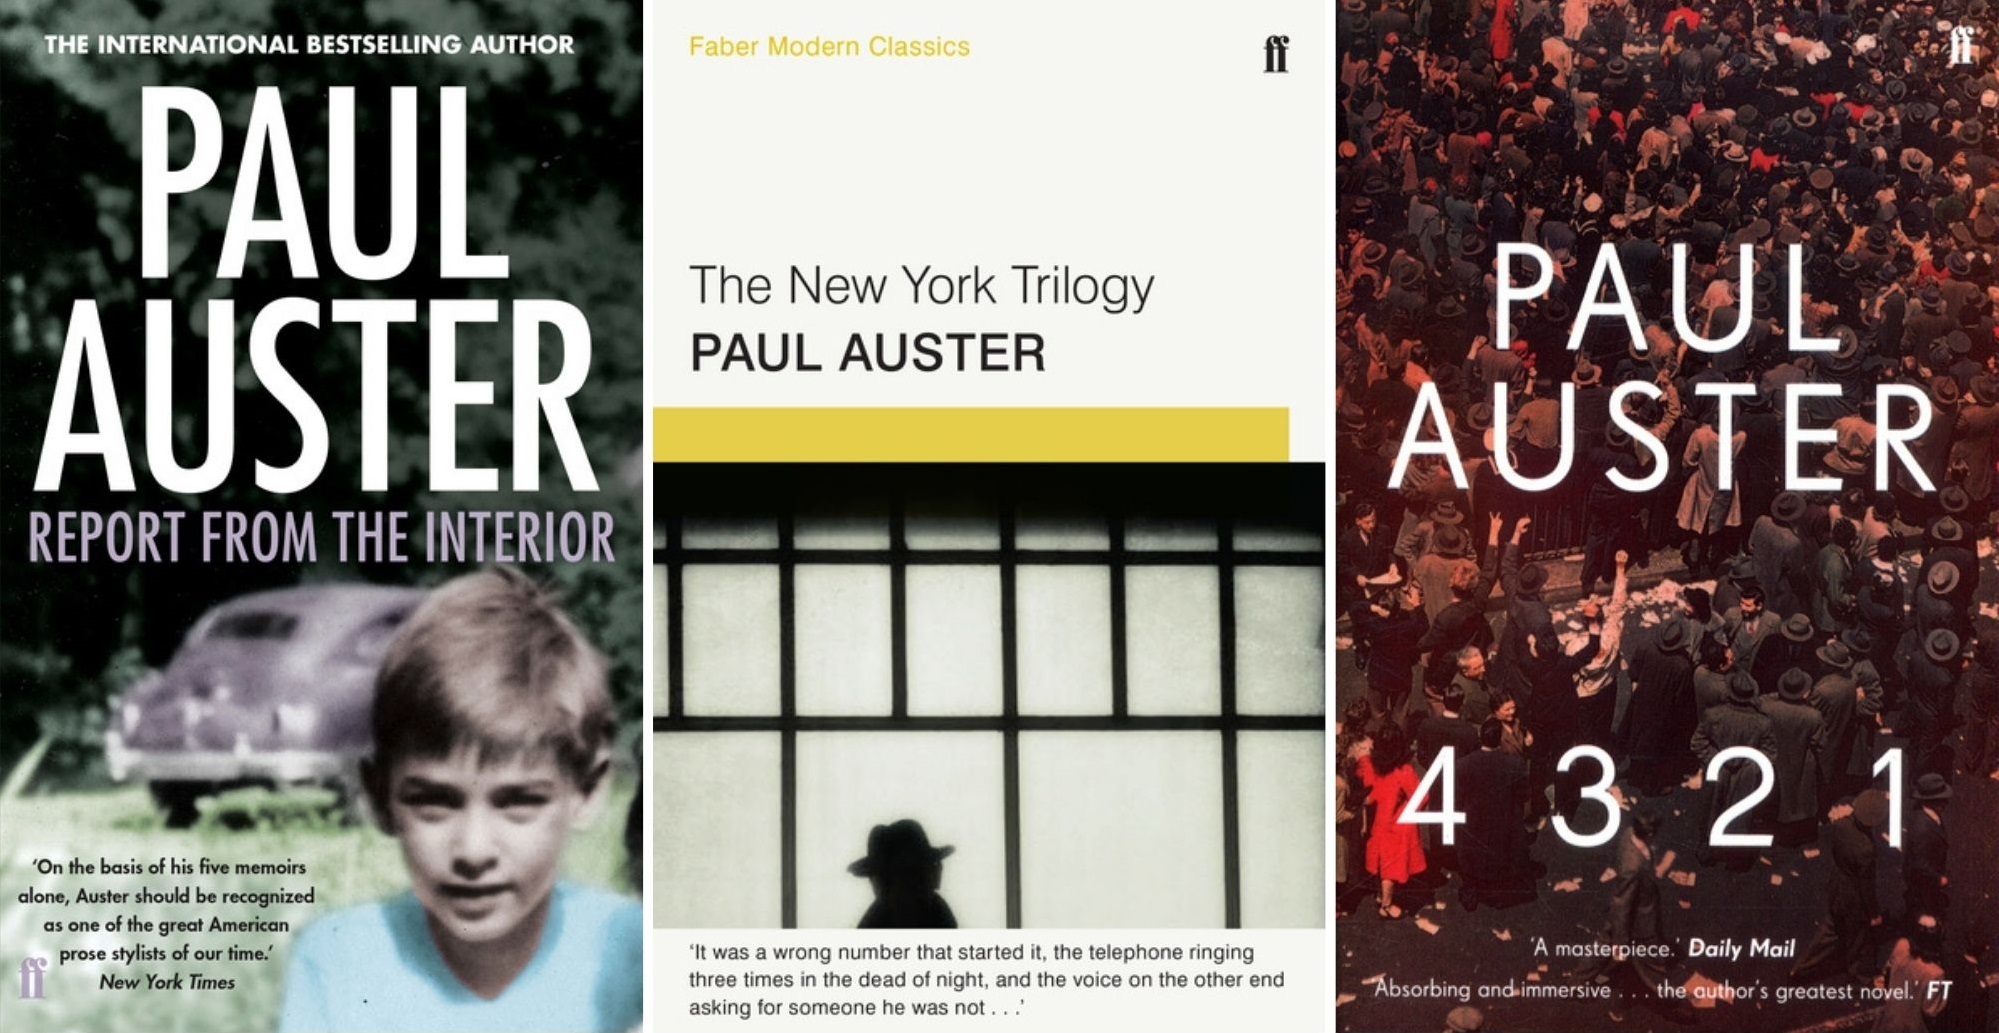 Books by Paul Auster.